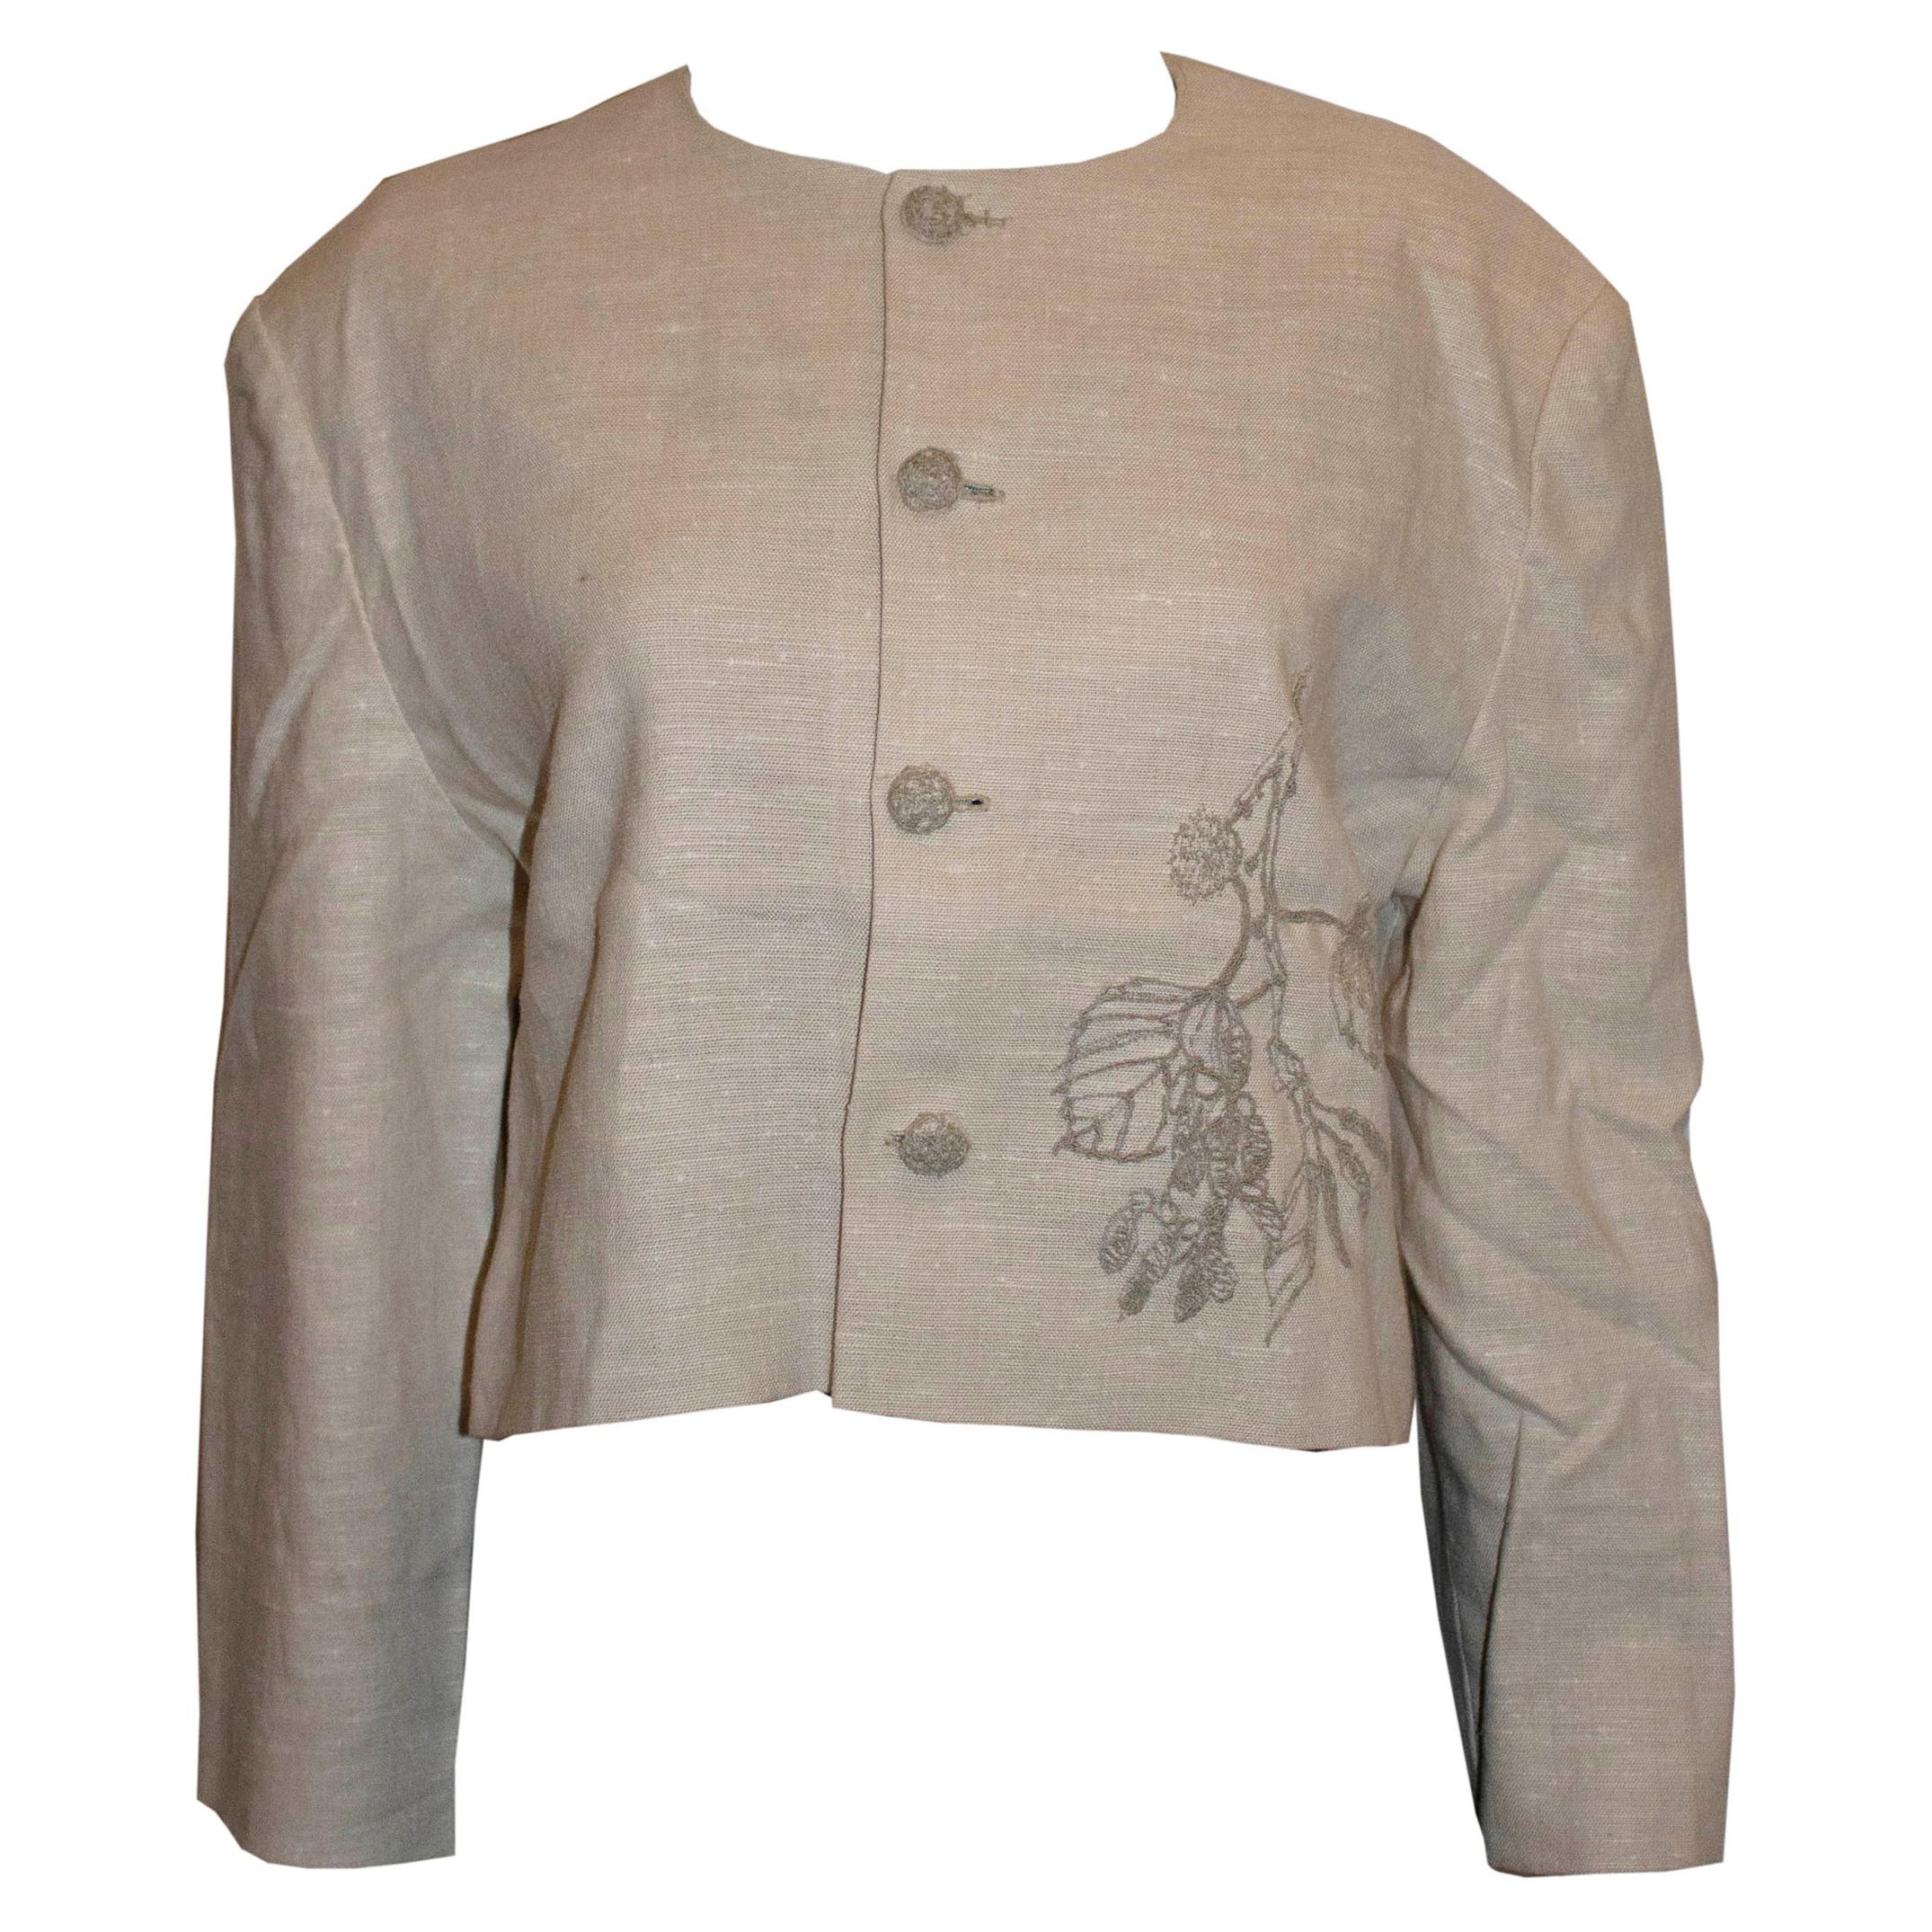 Vintage Raw Linen Mix Jacket with Embroidery Detail For Sale